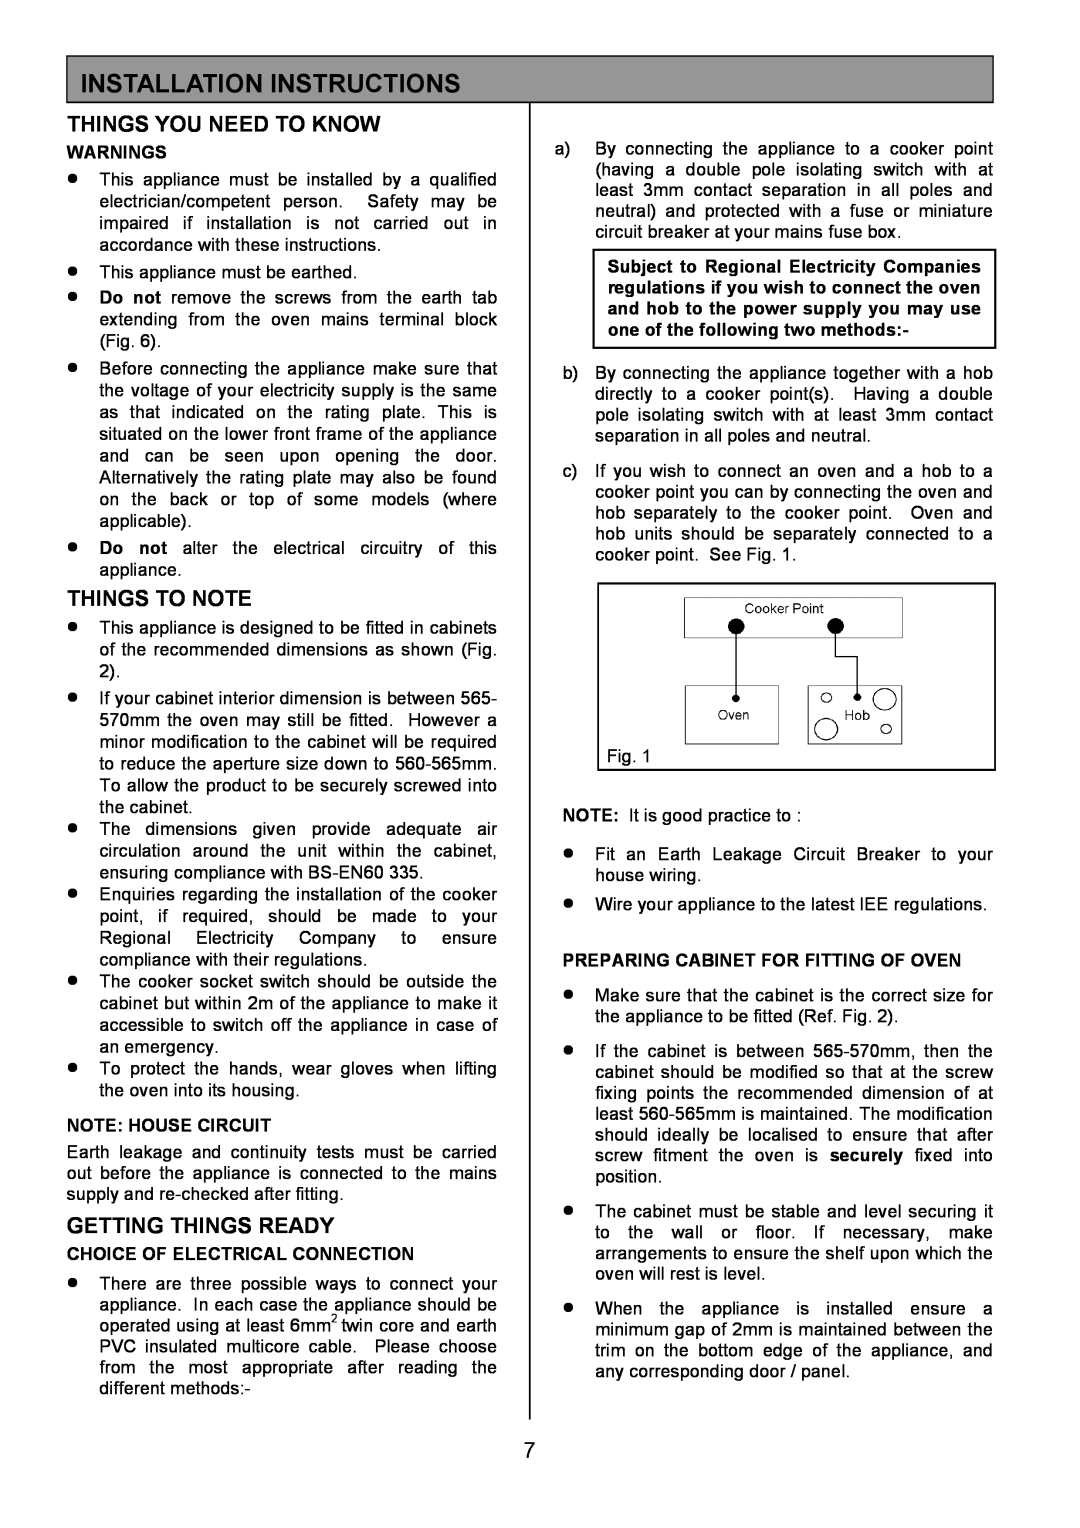 Zanussi ZDQ 695 manual Installation Instructions, Things You Need To Know, Things To Note, Getting Things Ready, Warnings 